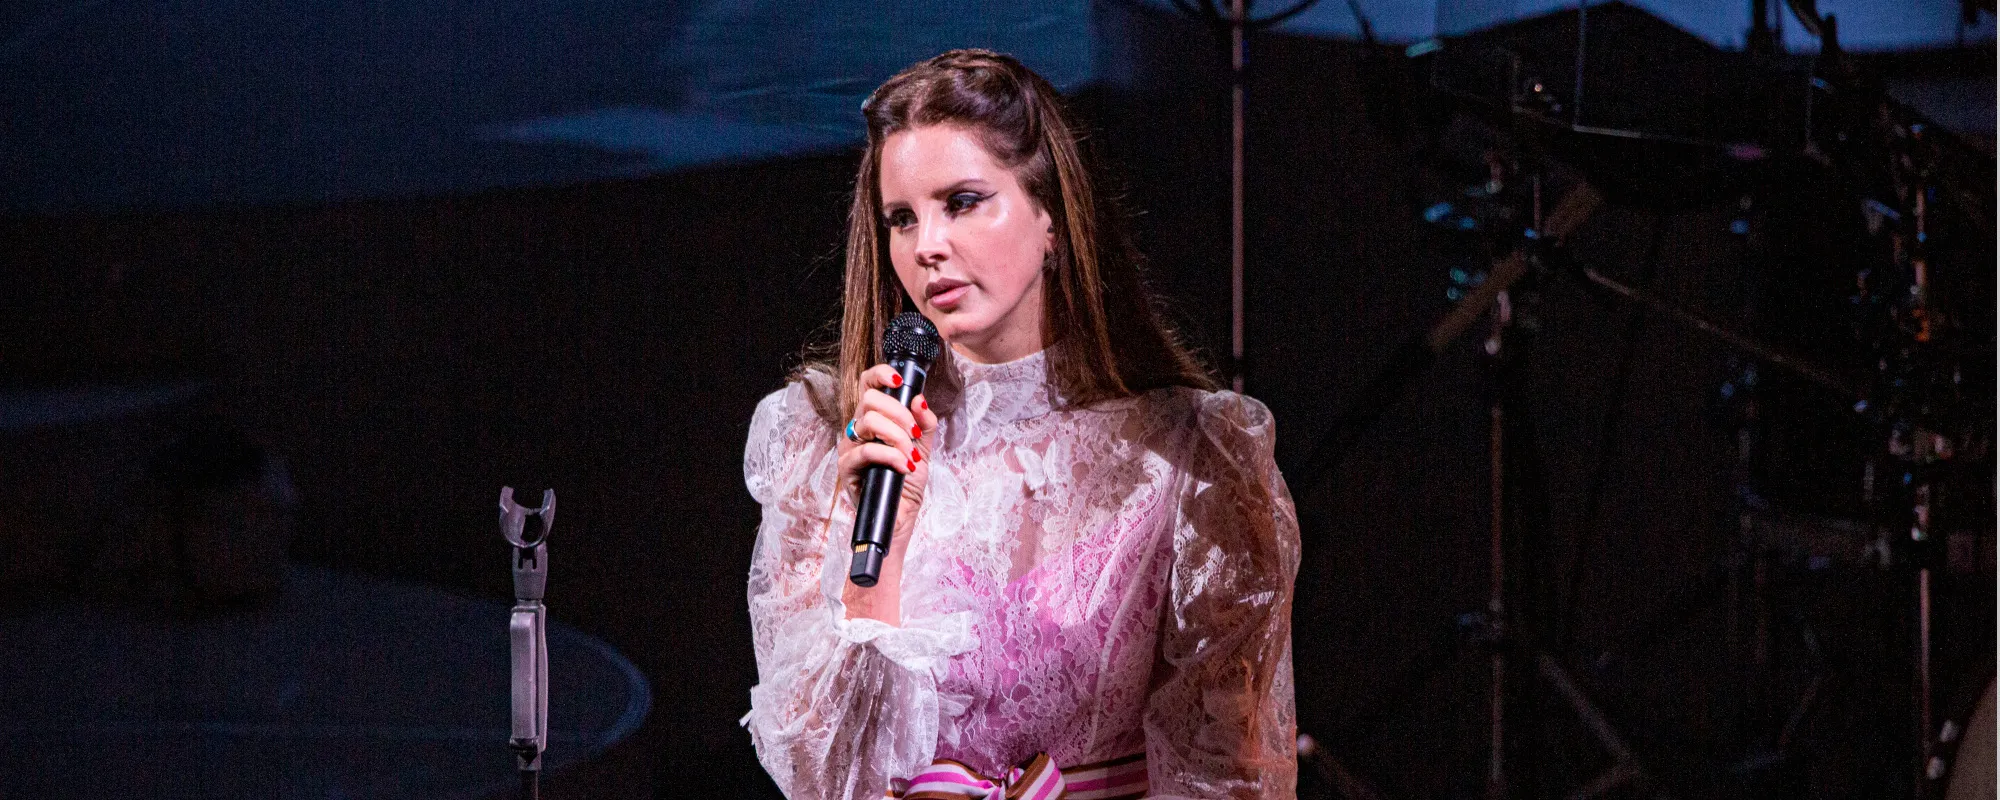 5 Things to Know About Lana Del Rey